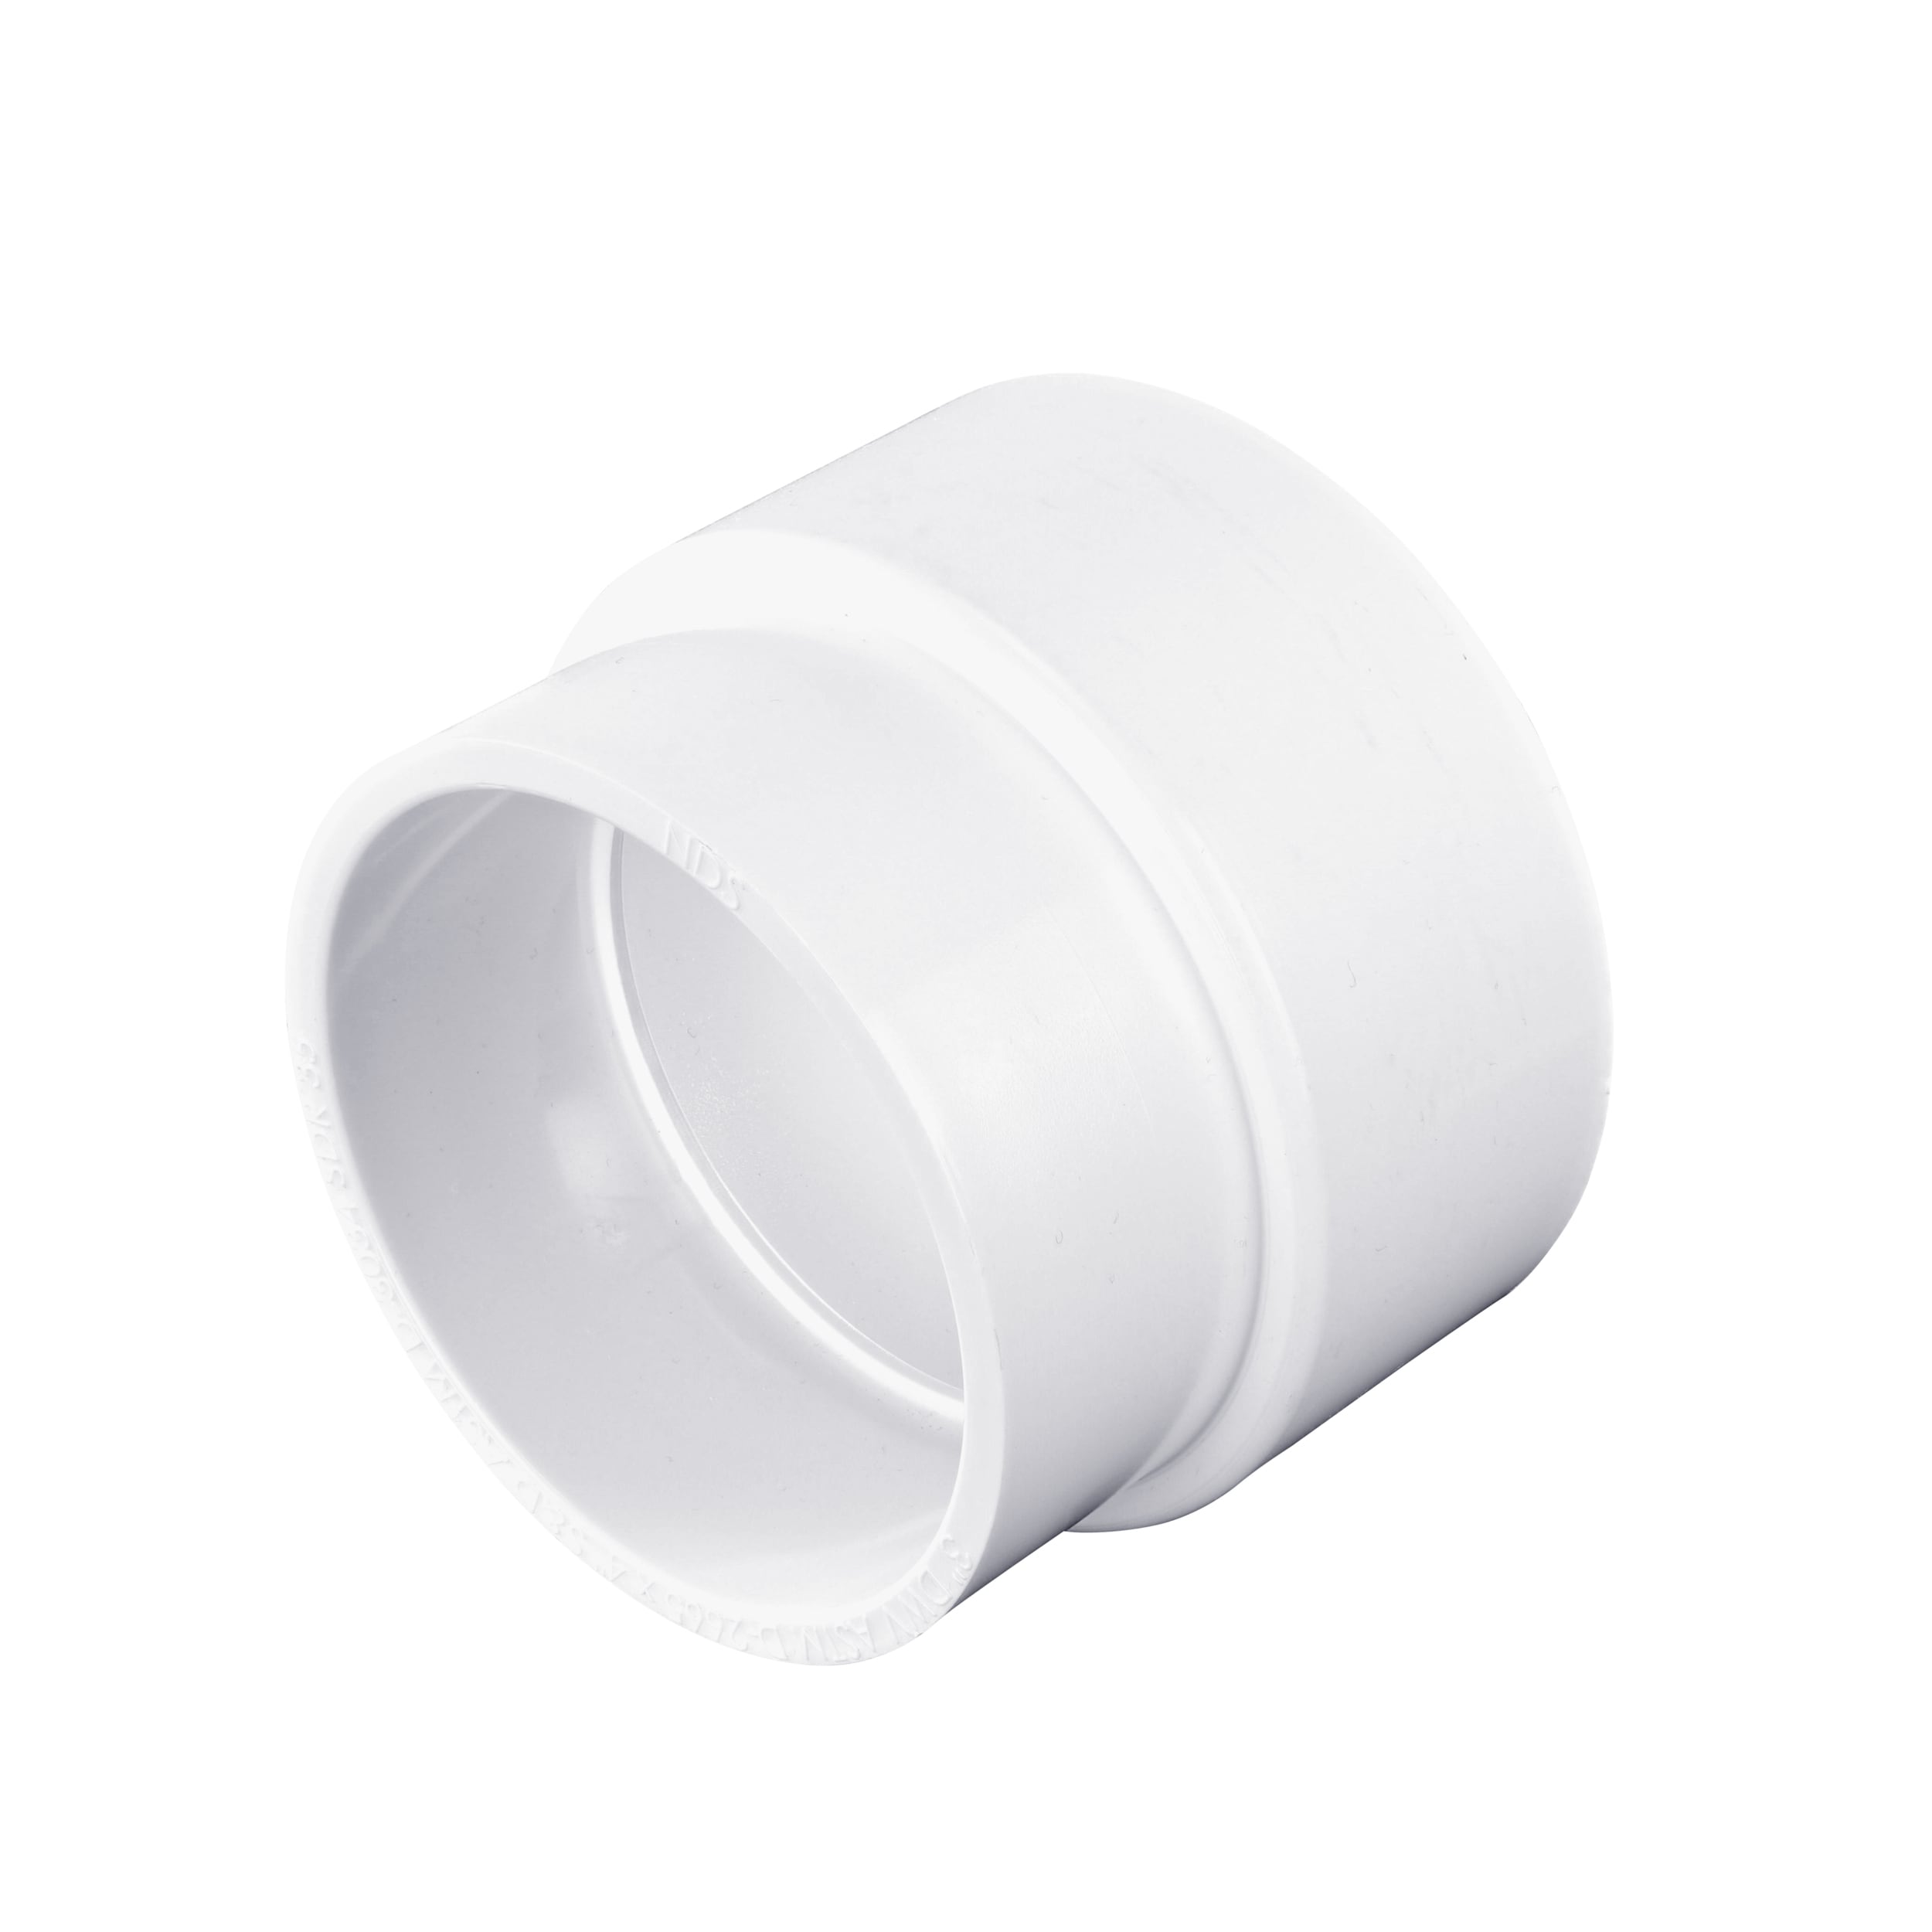 Medic Kan fortov 4-in PVC Sewer and Drain Adapter in the Sewage Pipe & Fittings department  at Lowes.com